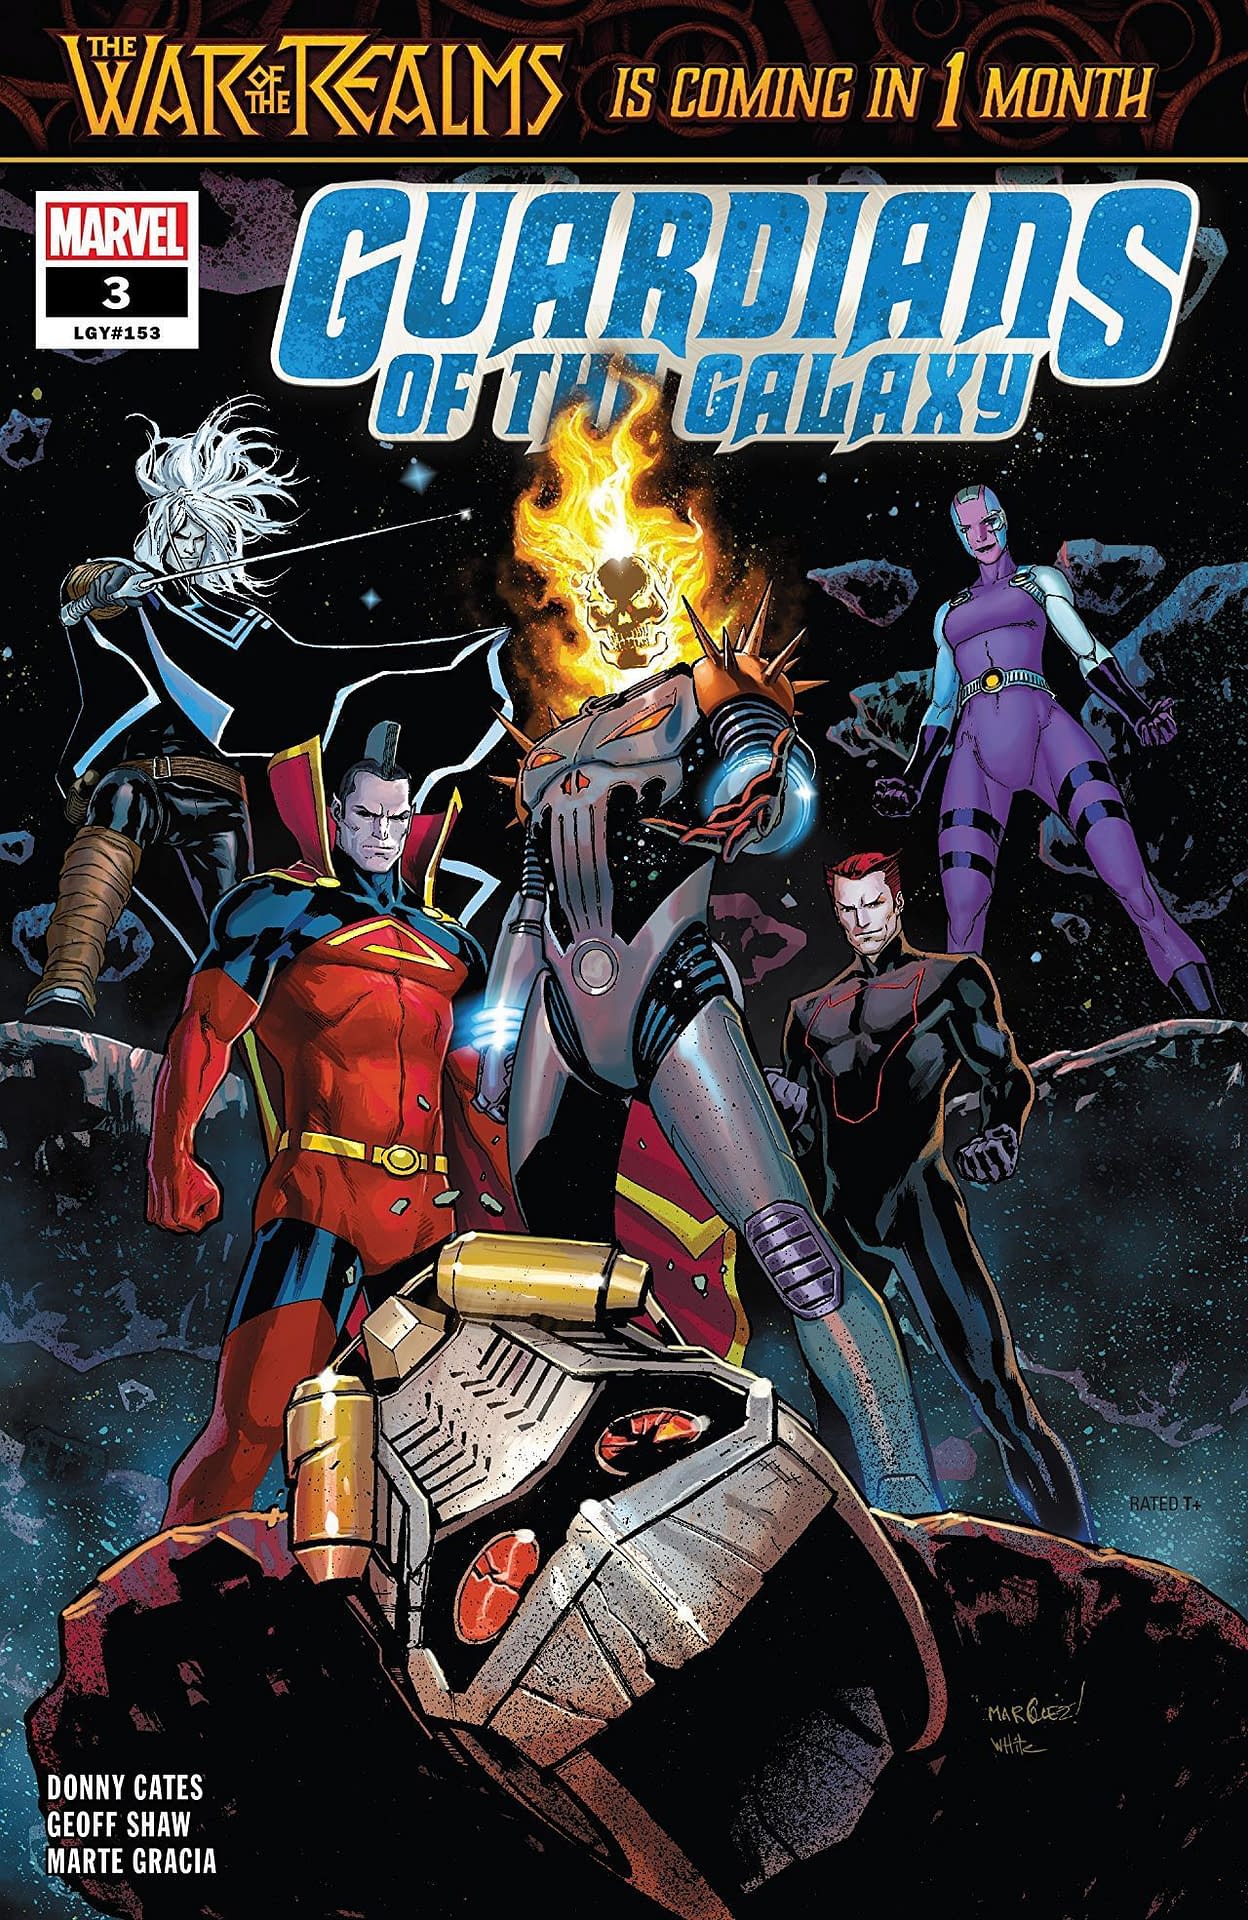 Annihillus Pays Touching Tribute to Thanos in Next Week's Guardians of the Galaxy #3